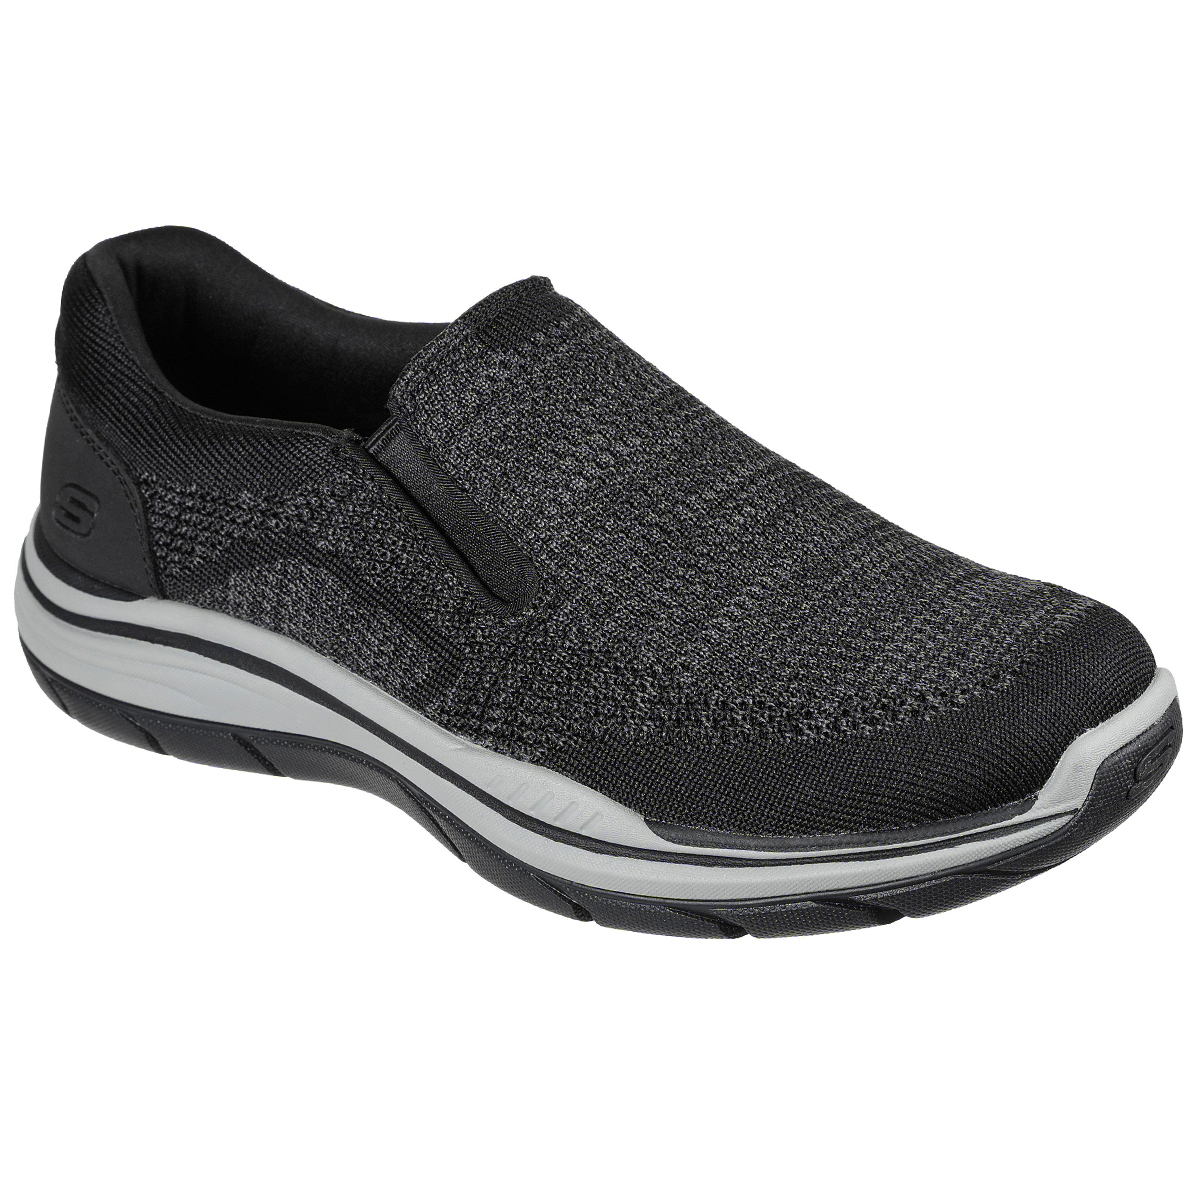 Skechers Men's Relaxed Fit Expected 2.0 Arago Slip-On Shoes